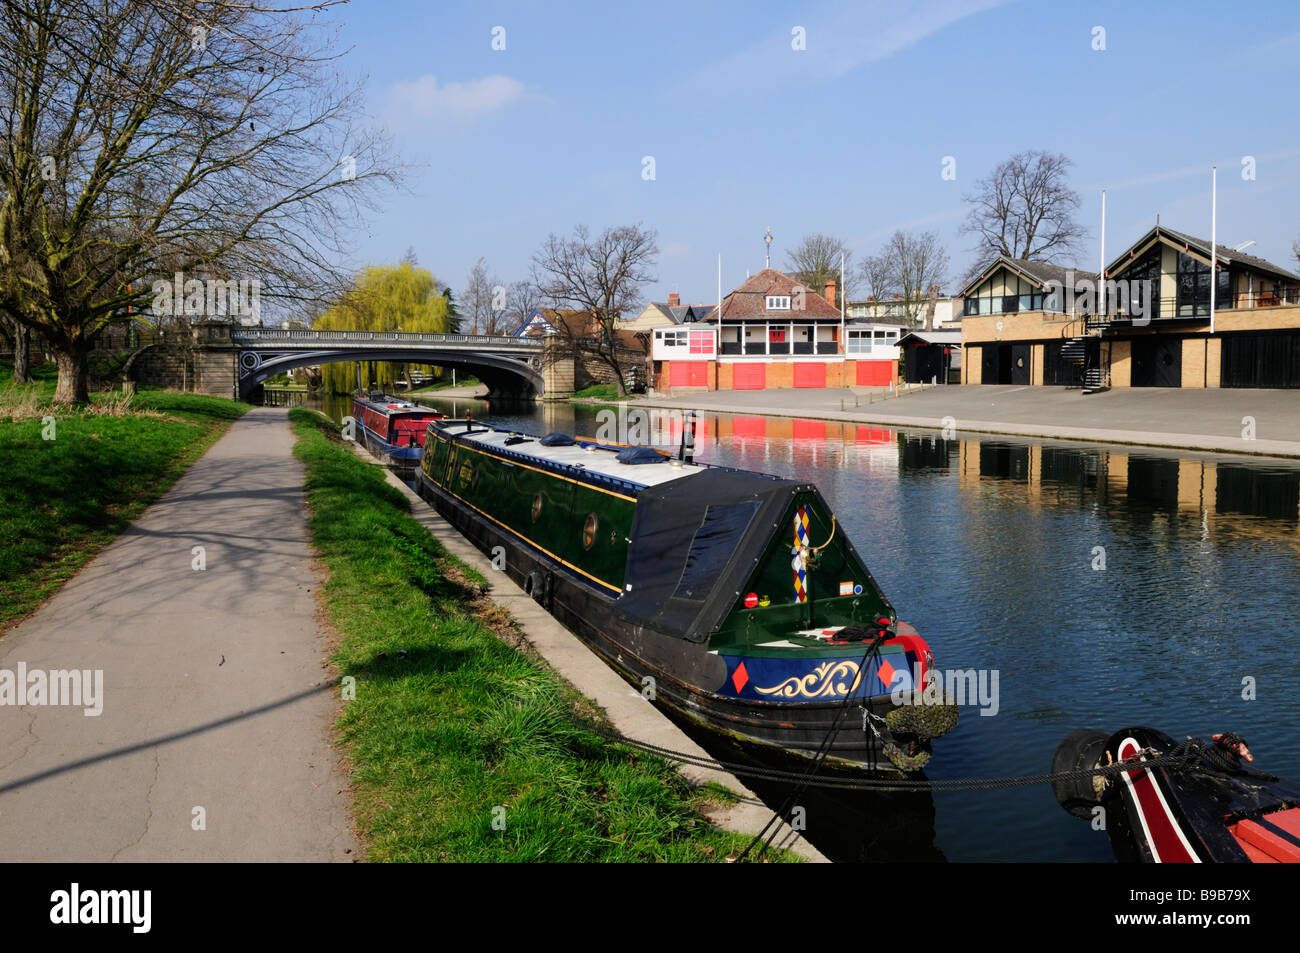 Narrowboats moored on the River Cam at Midsummer Common, with rowing boathouses on the far bank,  Cambridge England UK Stock Photo